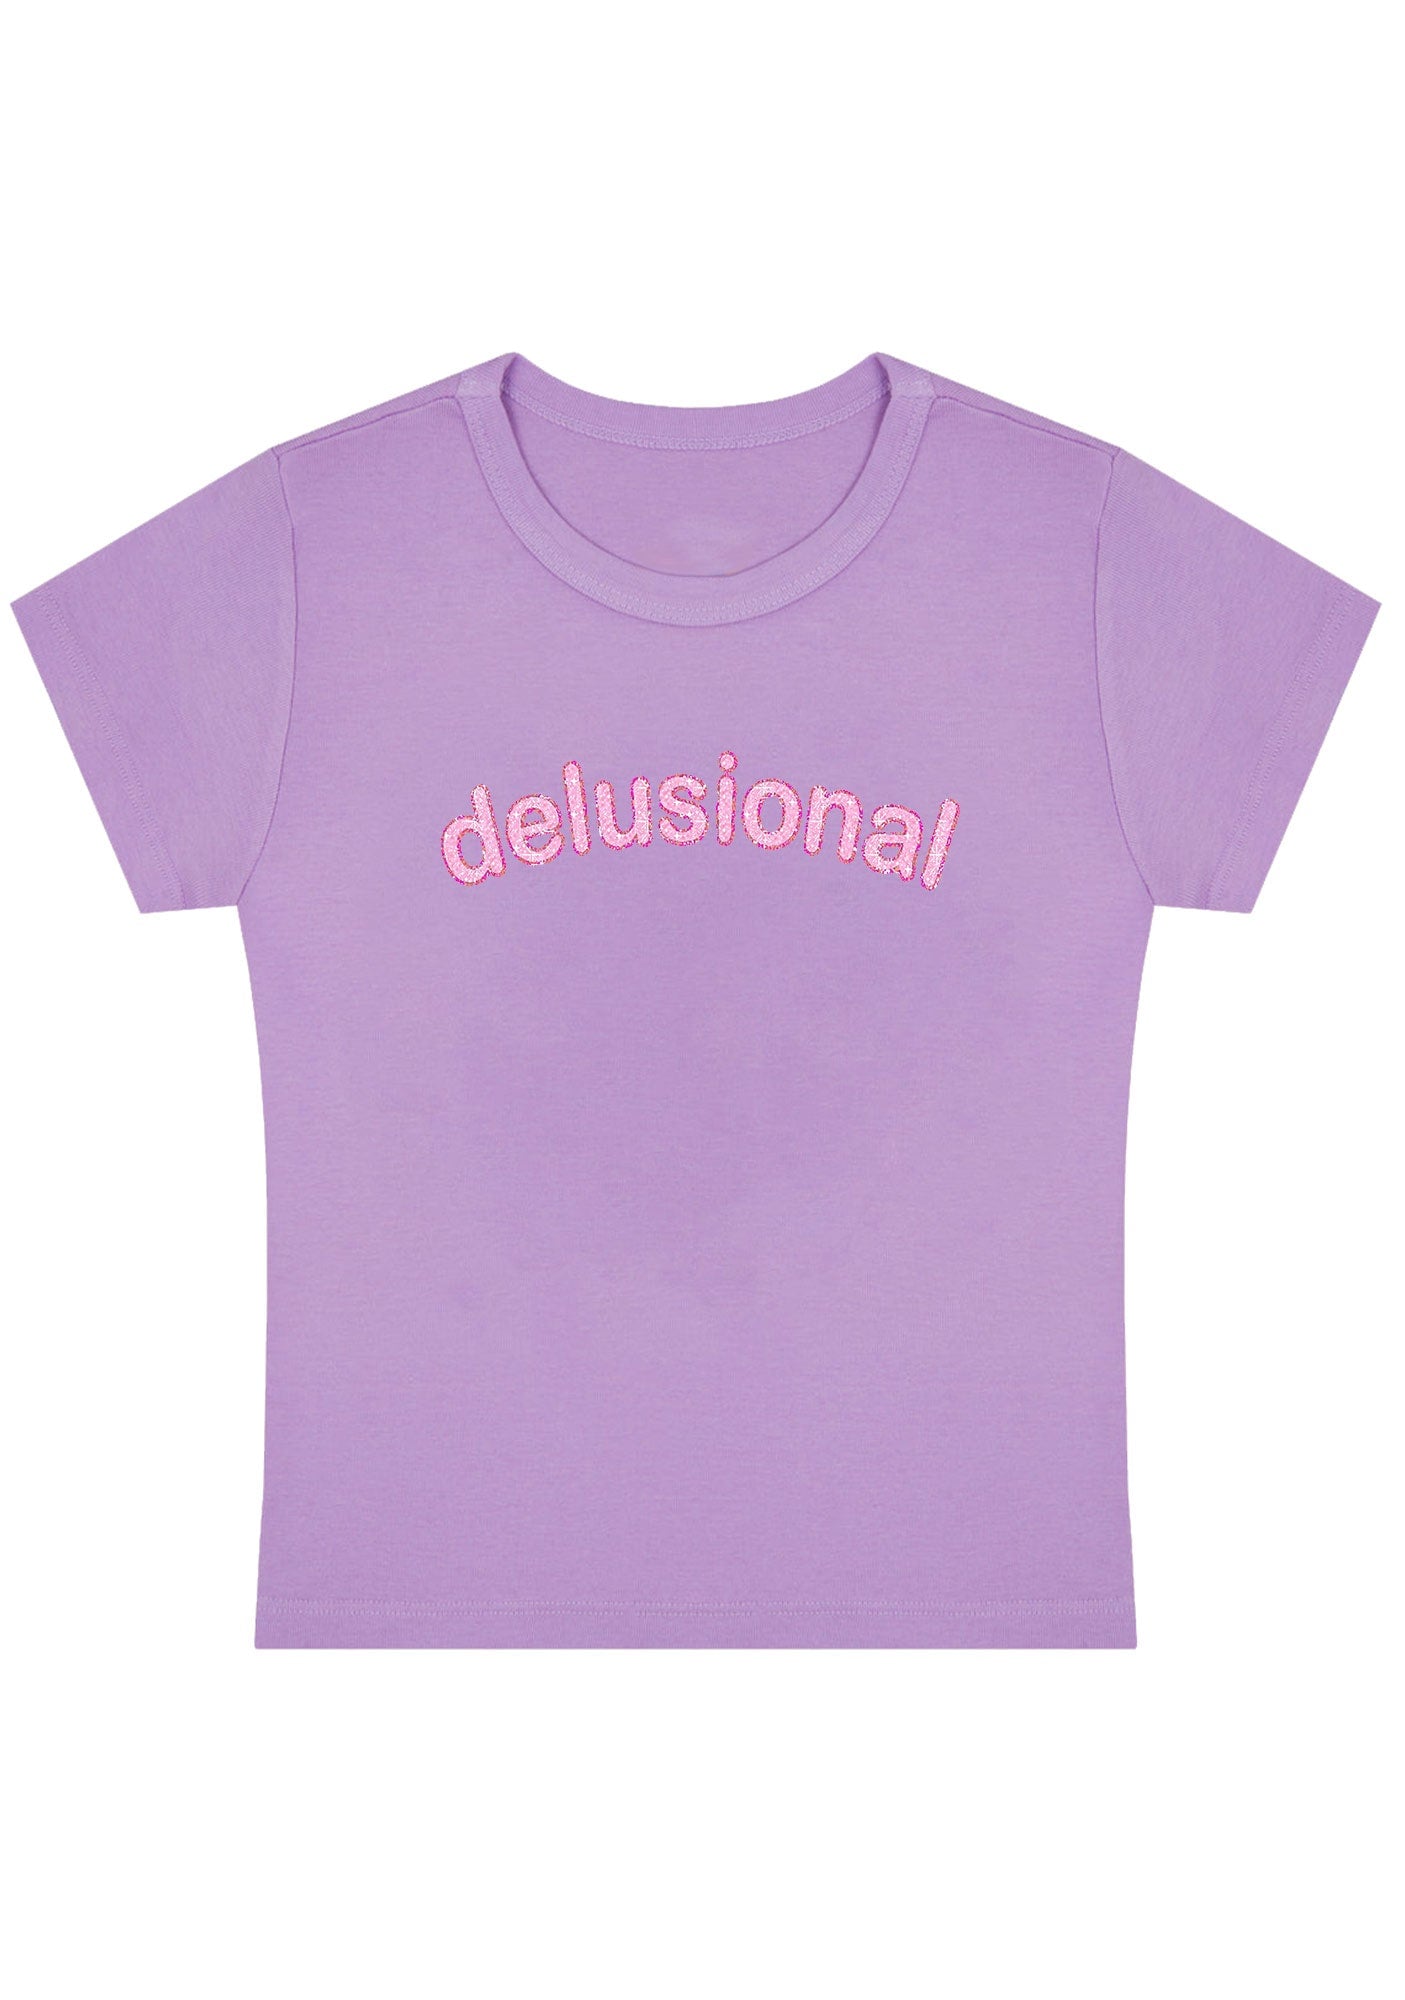 Curvy Delusional Baby Tee